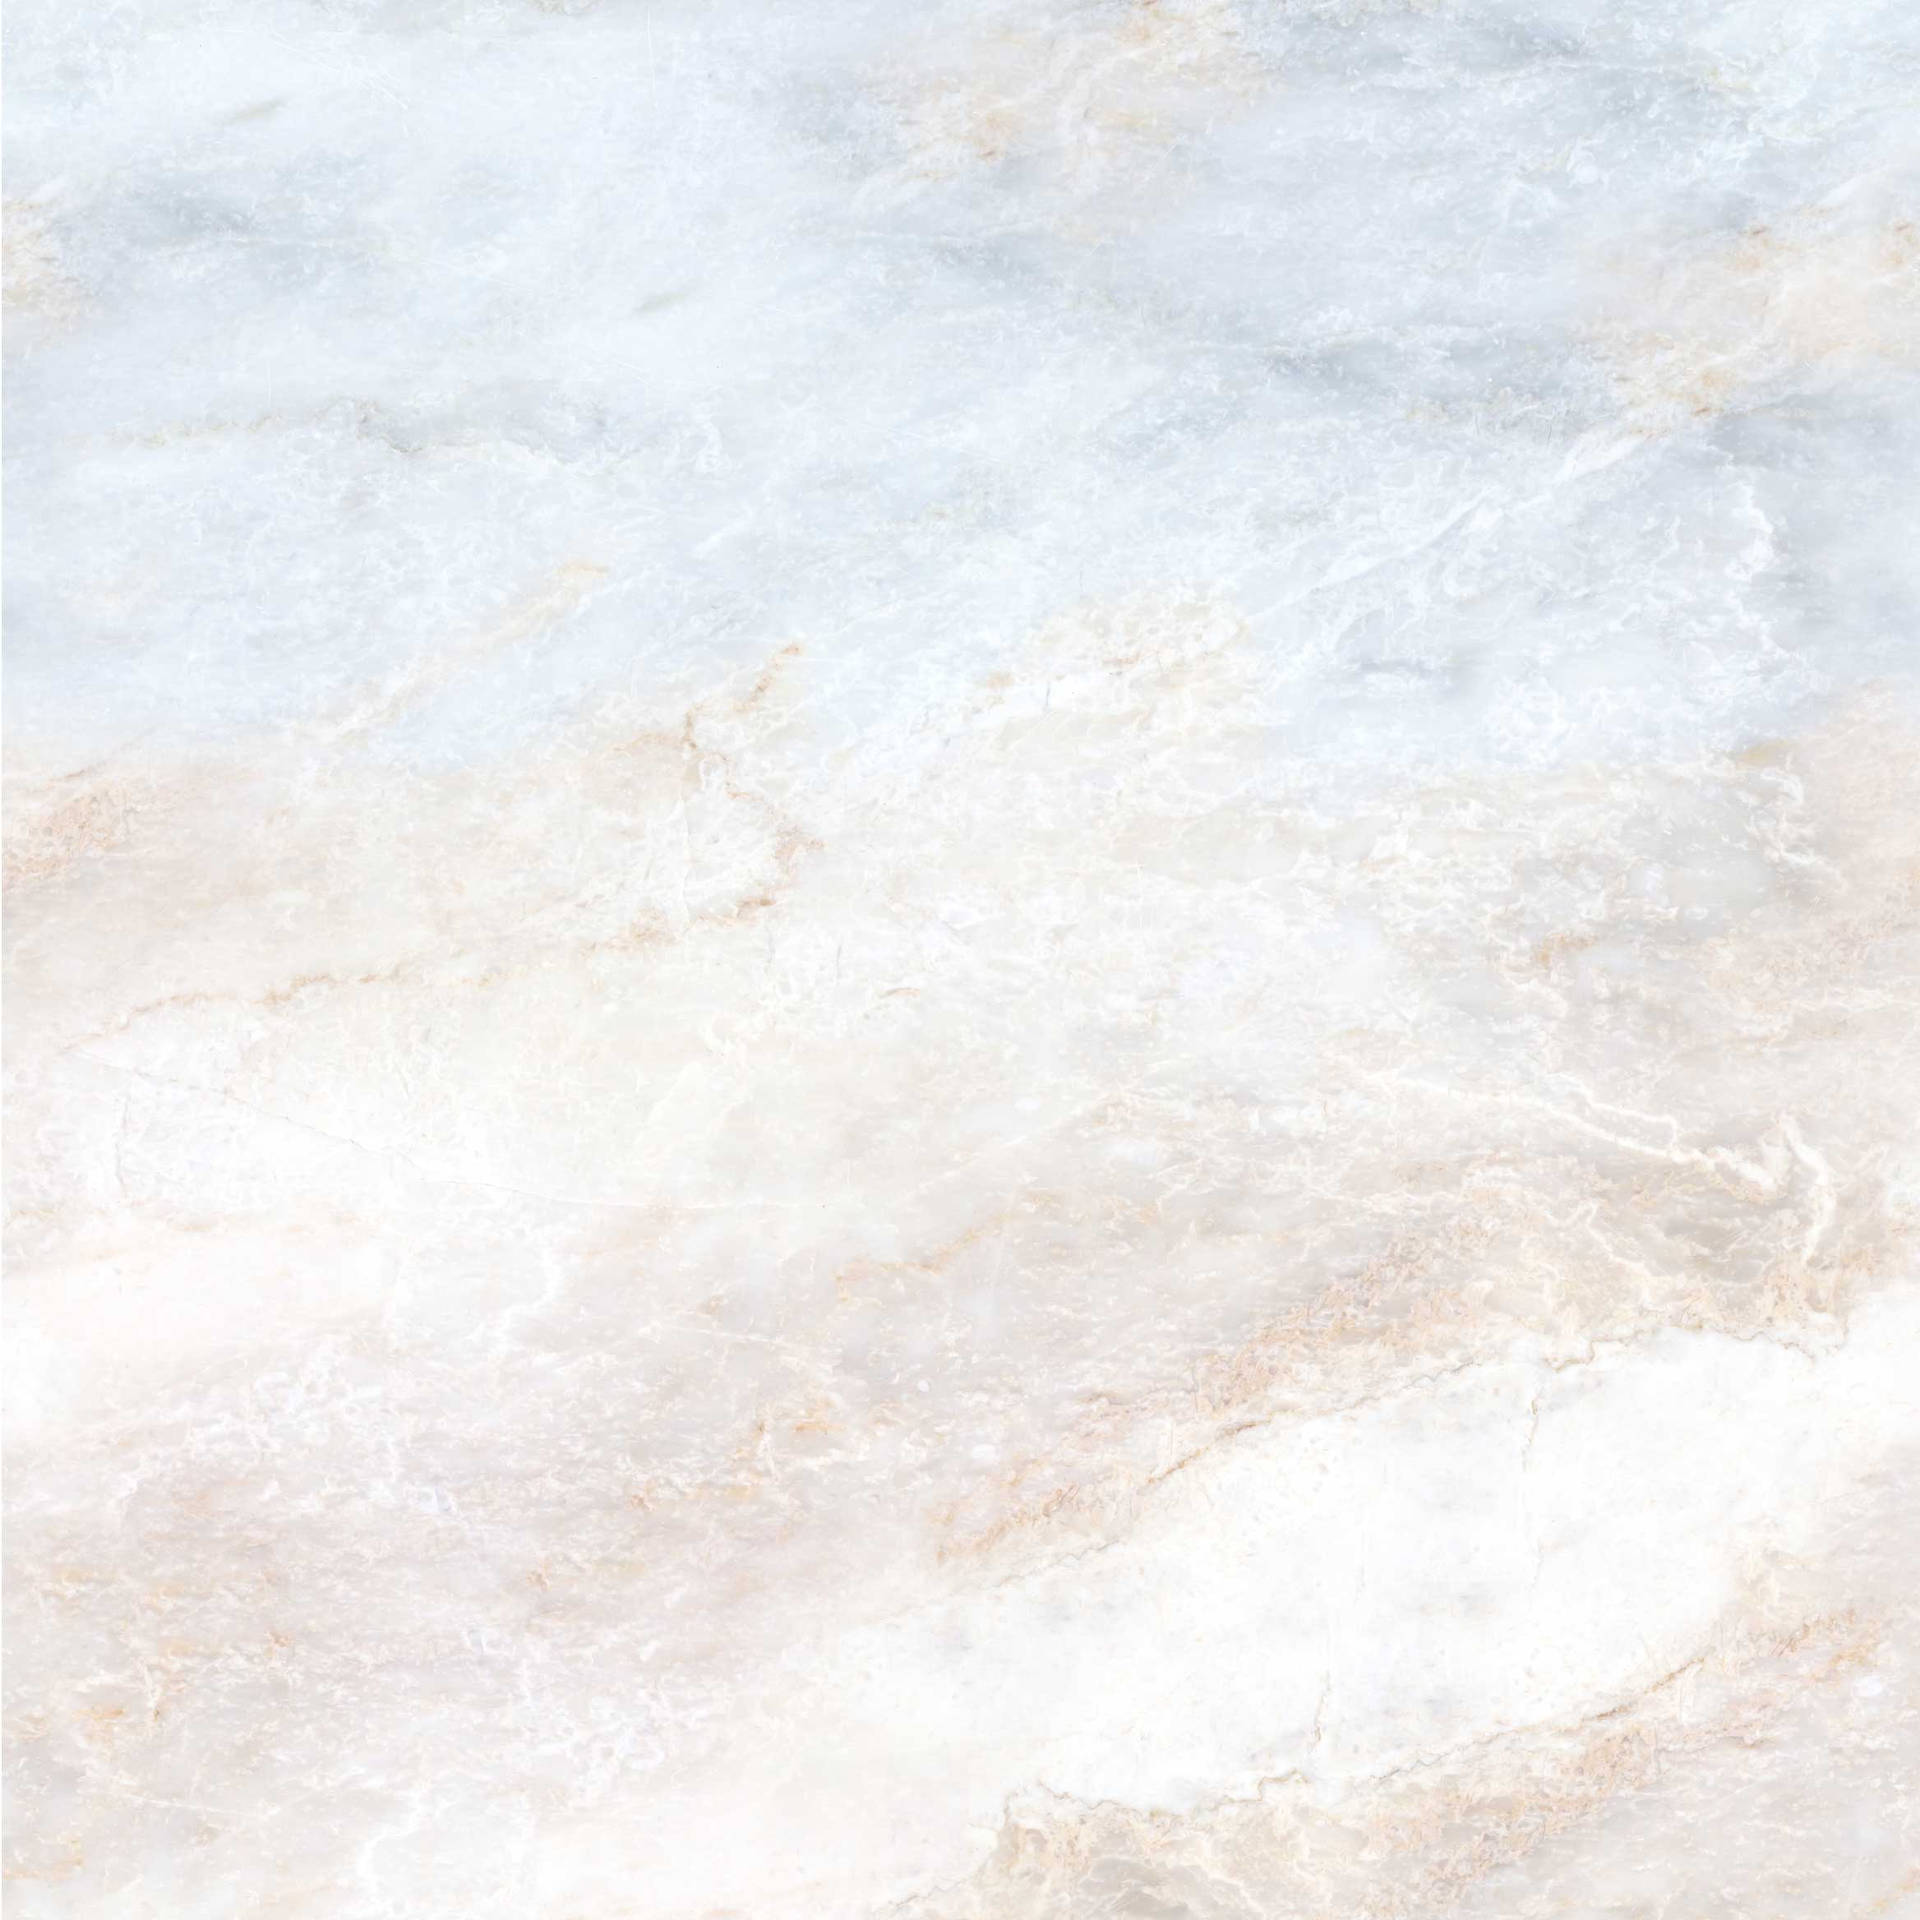 Smooth And Sleek Marble, A Timeless Addition To Any Home Décor. Background